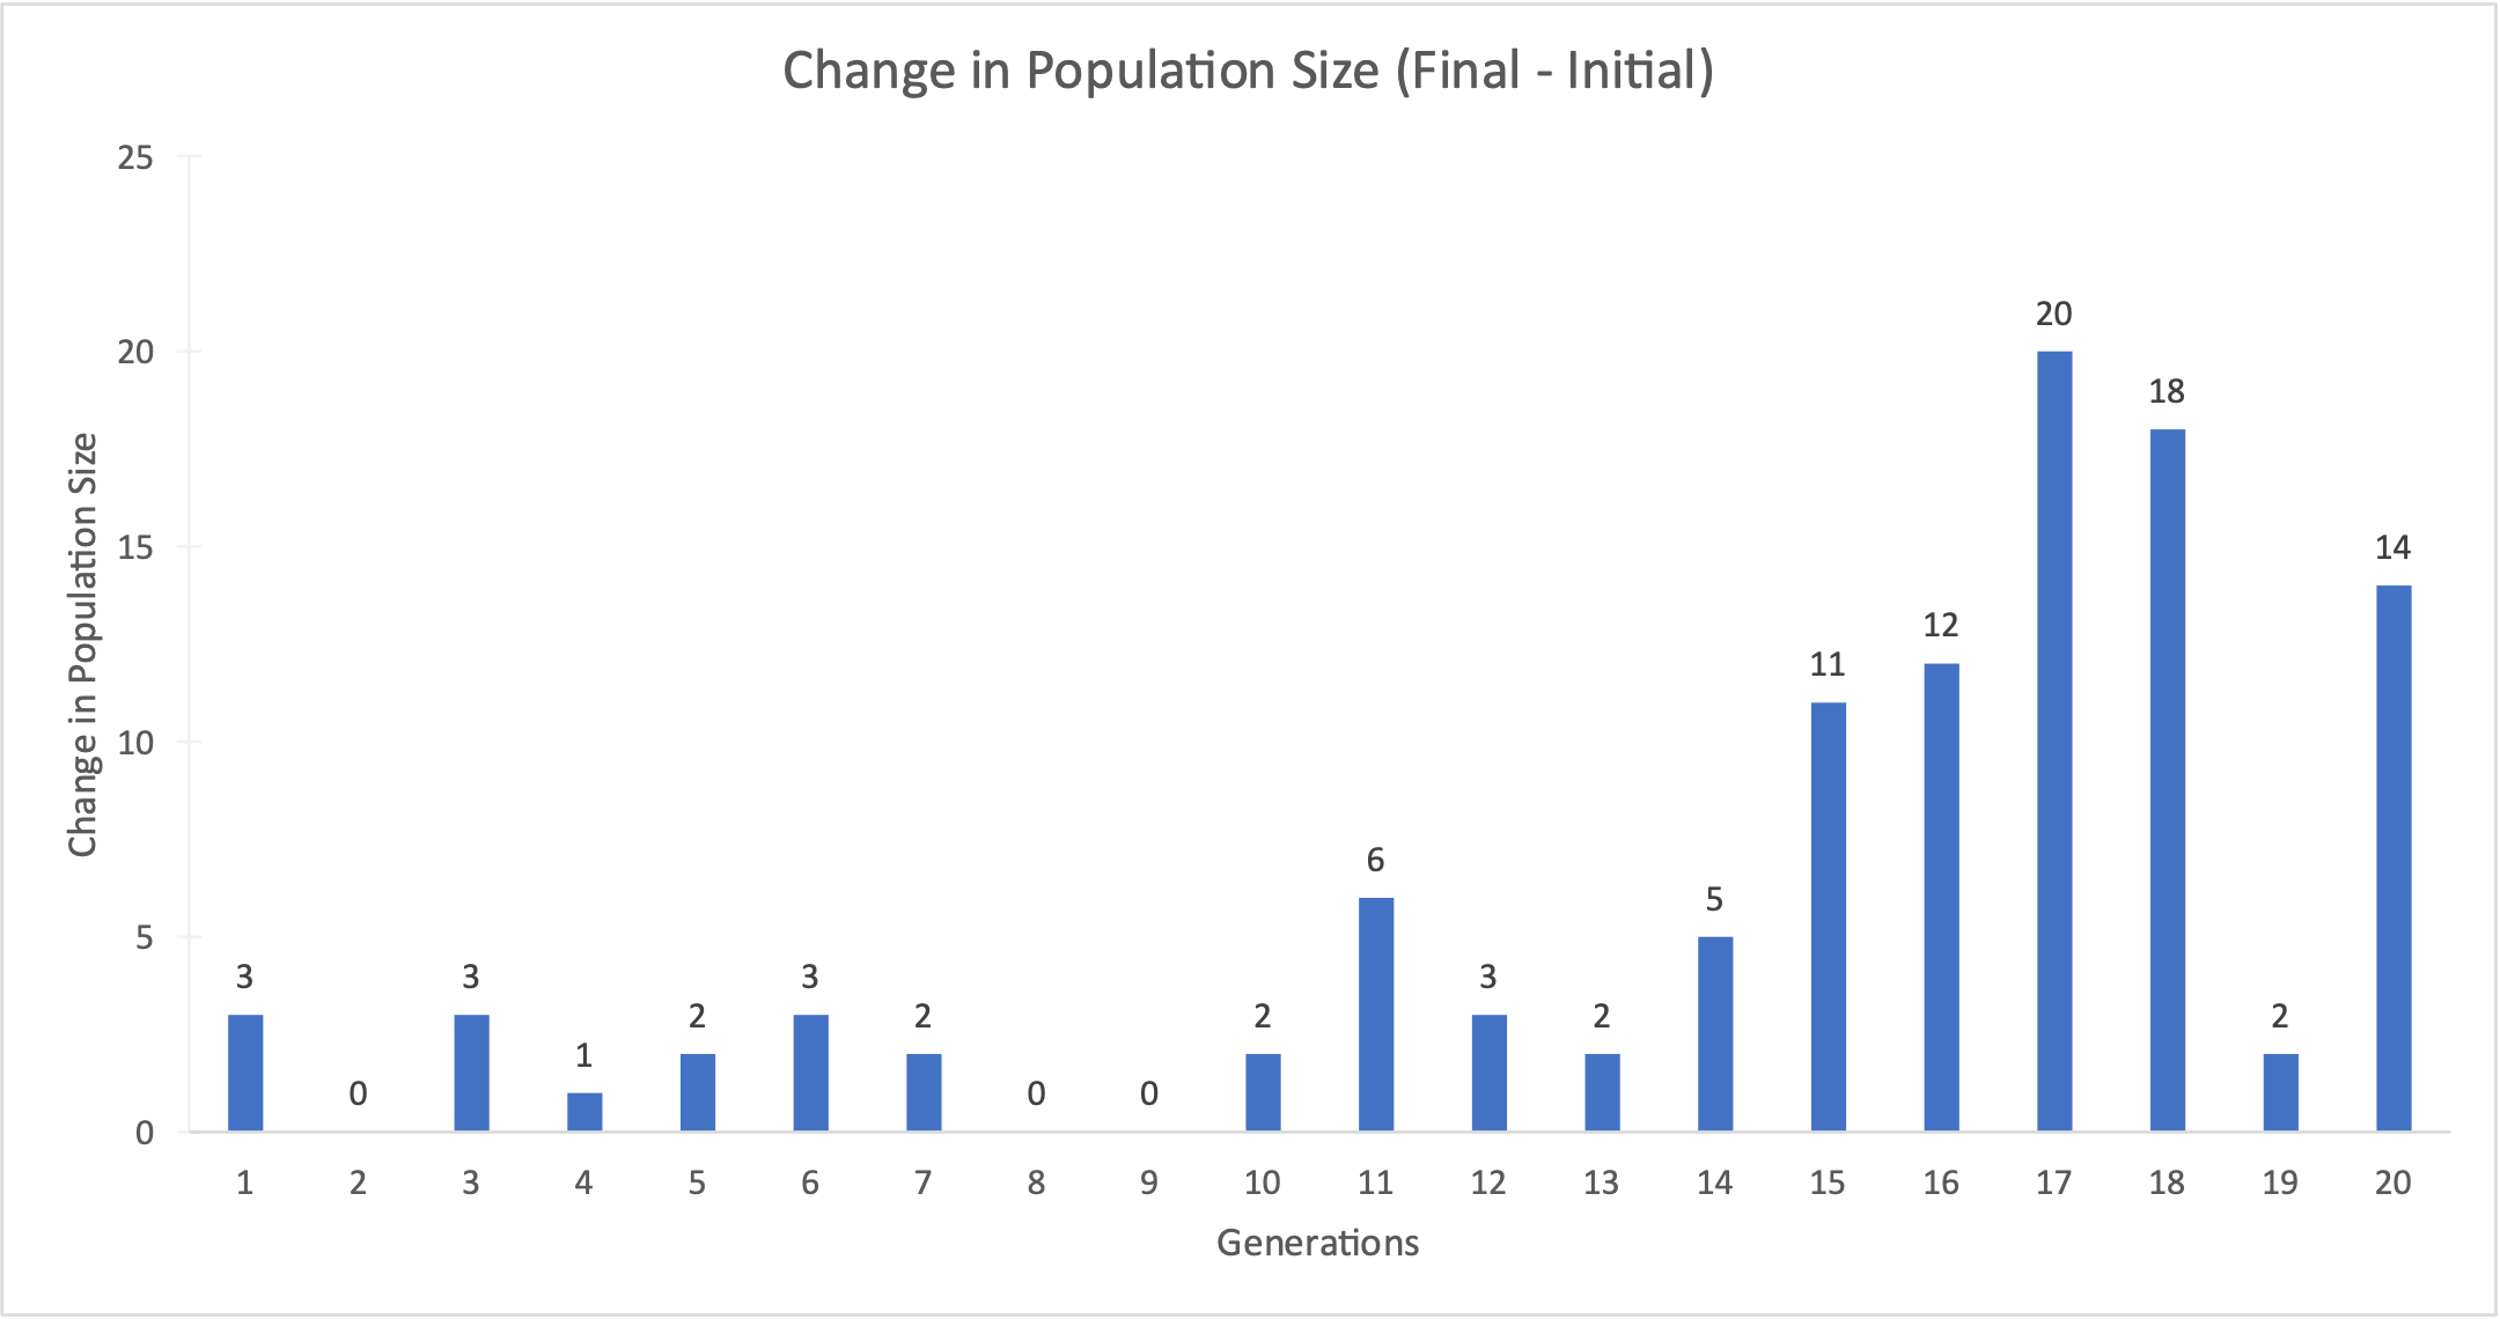 Dependence of the net changes in population size for each generation